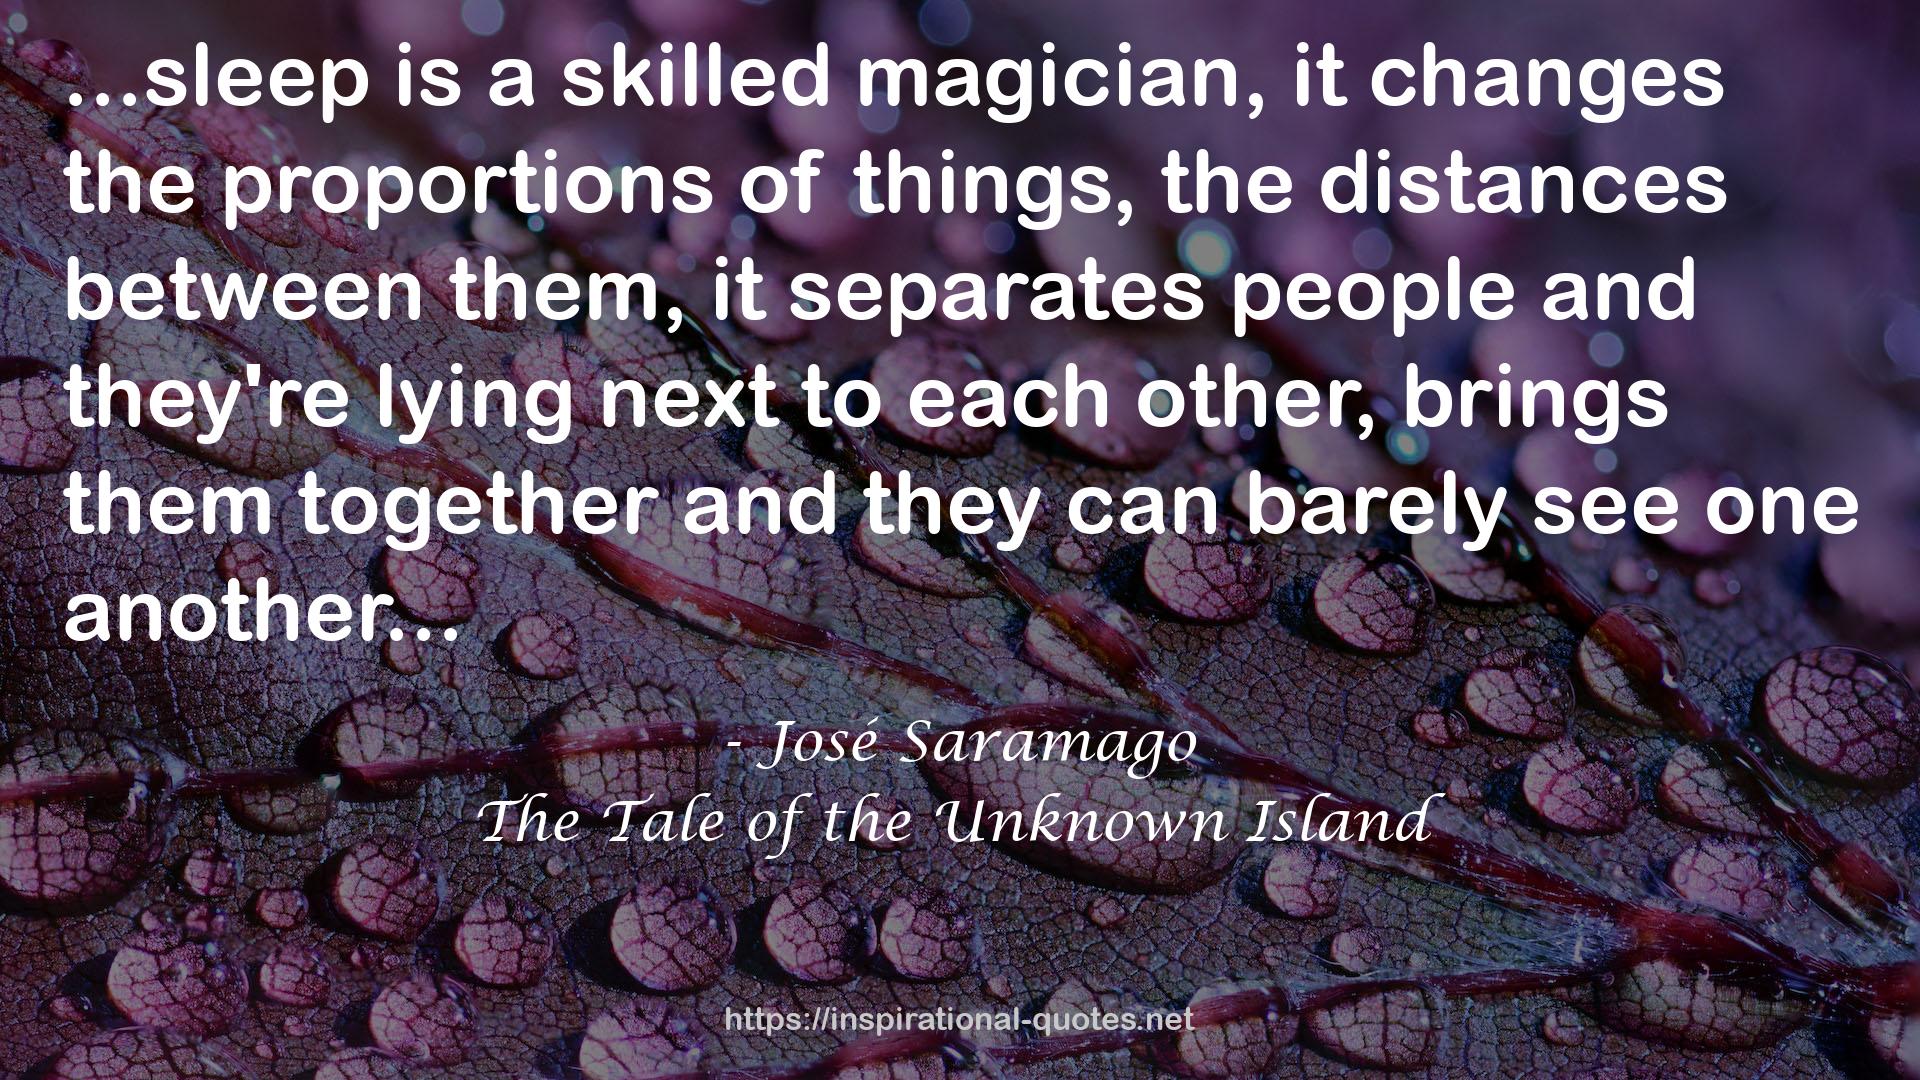 The Tale of the Unknown Island QUOTES